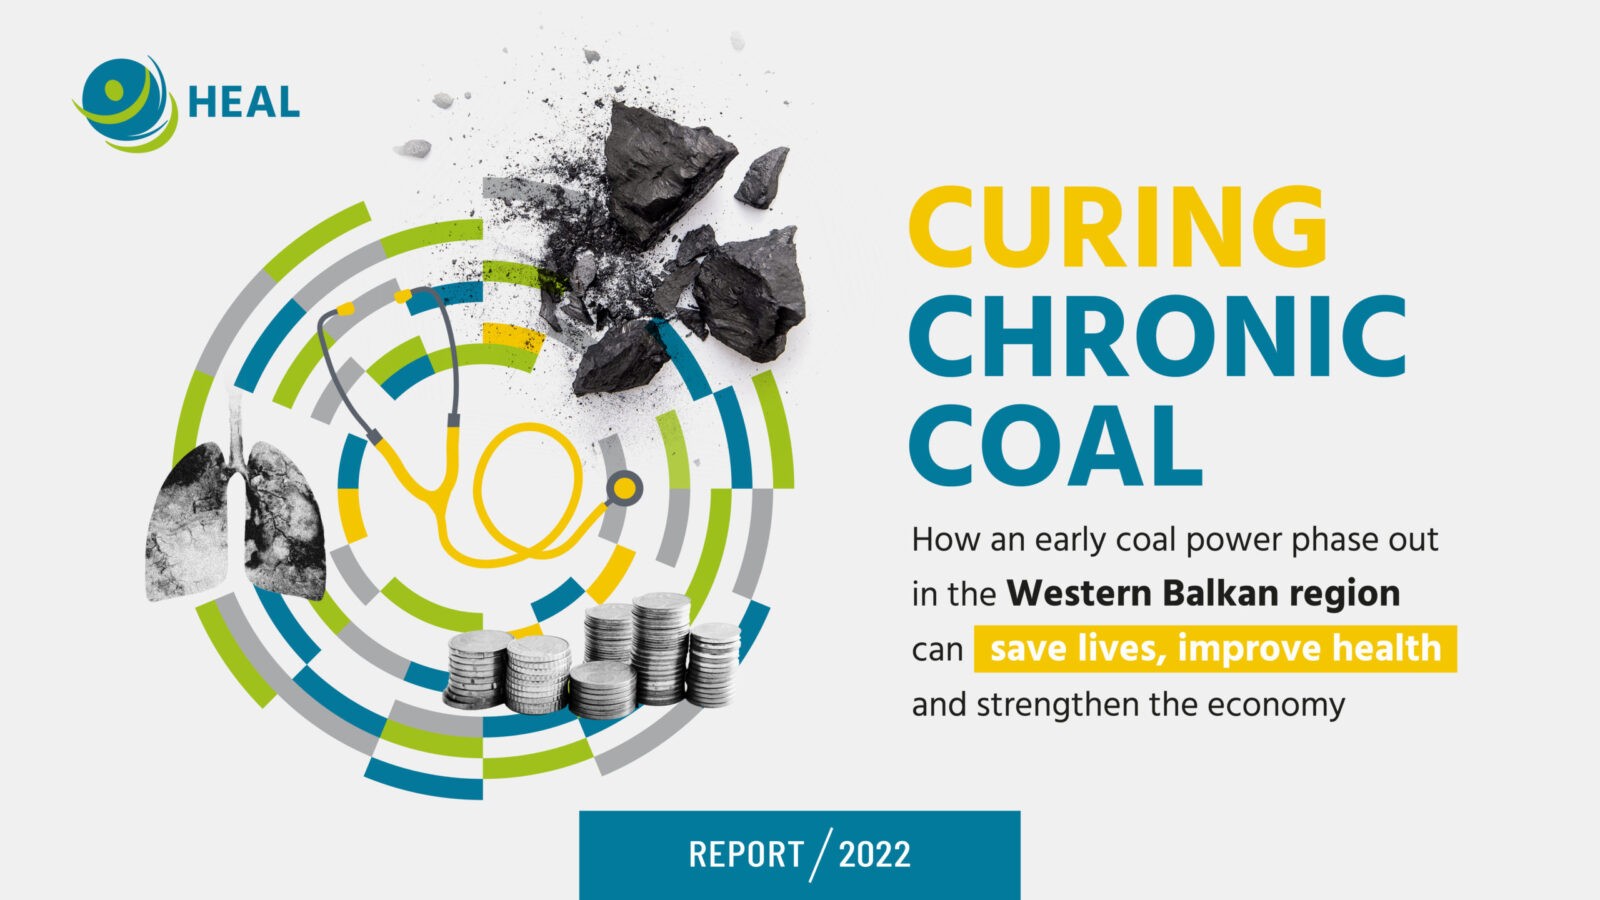 An early coal phase-out in the Western Balkan can save lives, improve health and strengthen the economy